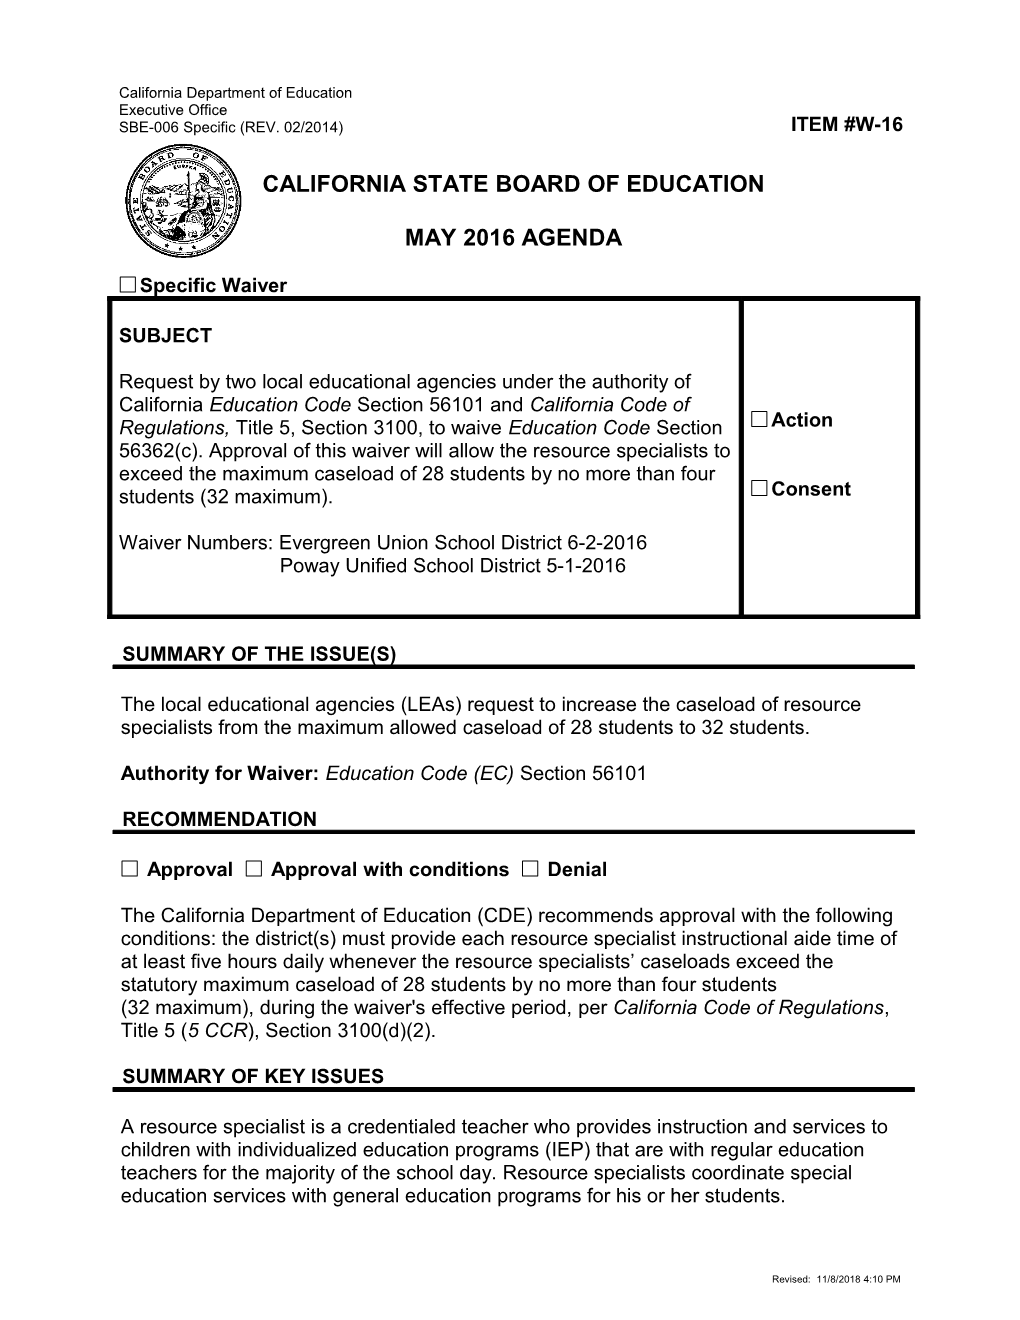 May 2016 Waiver Item W-16 - Meeting Agendas (CA State Board of Education)